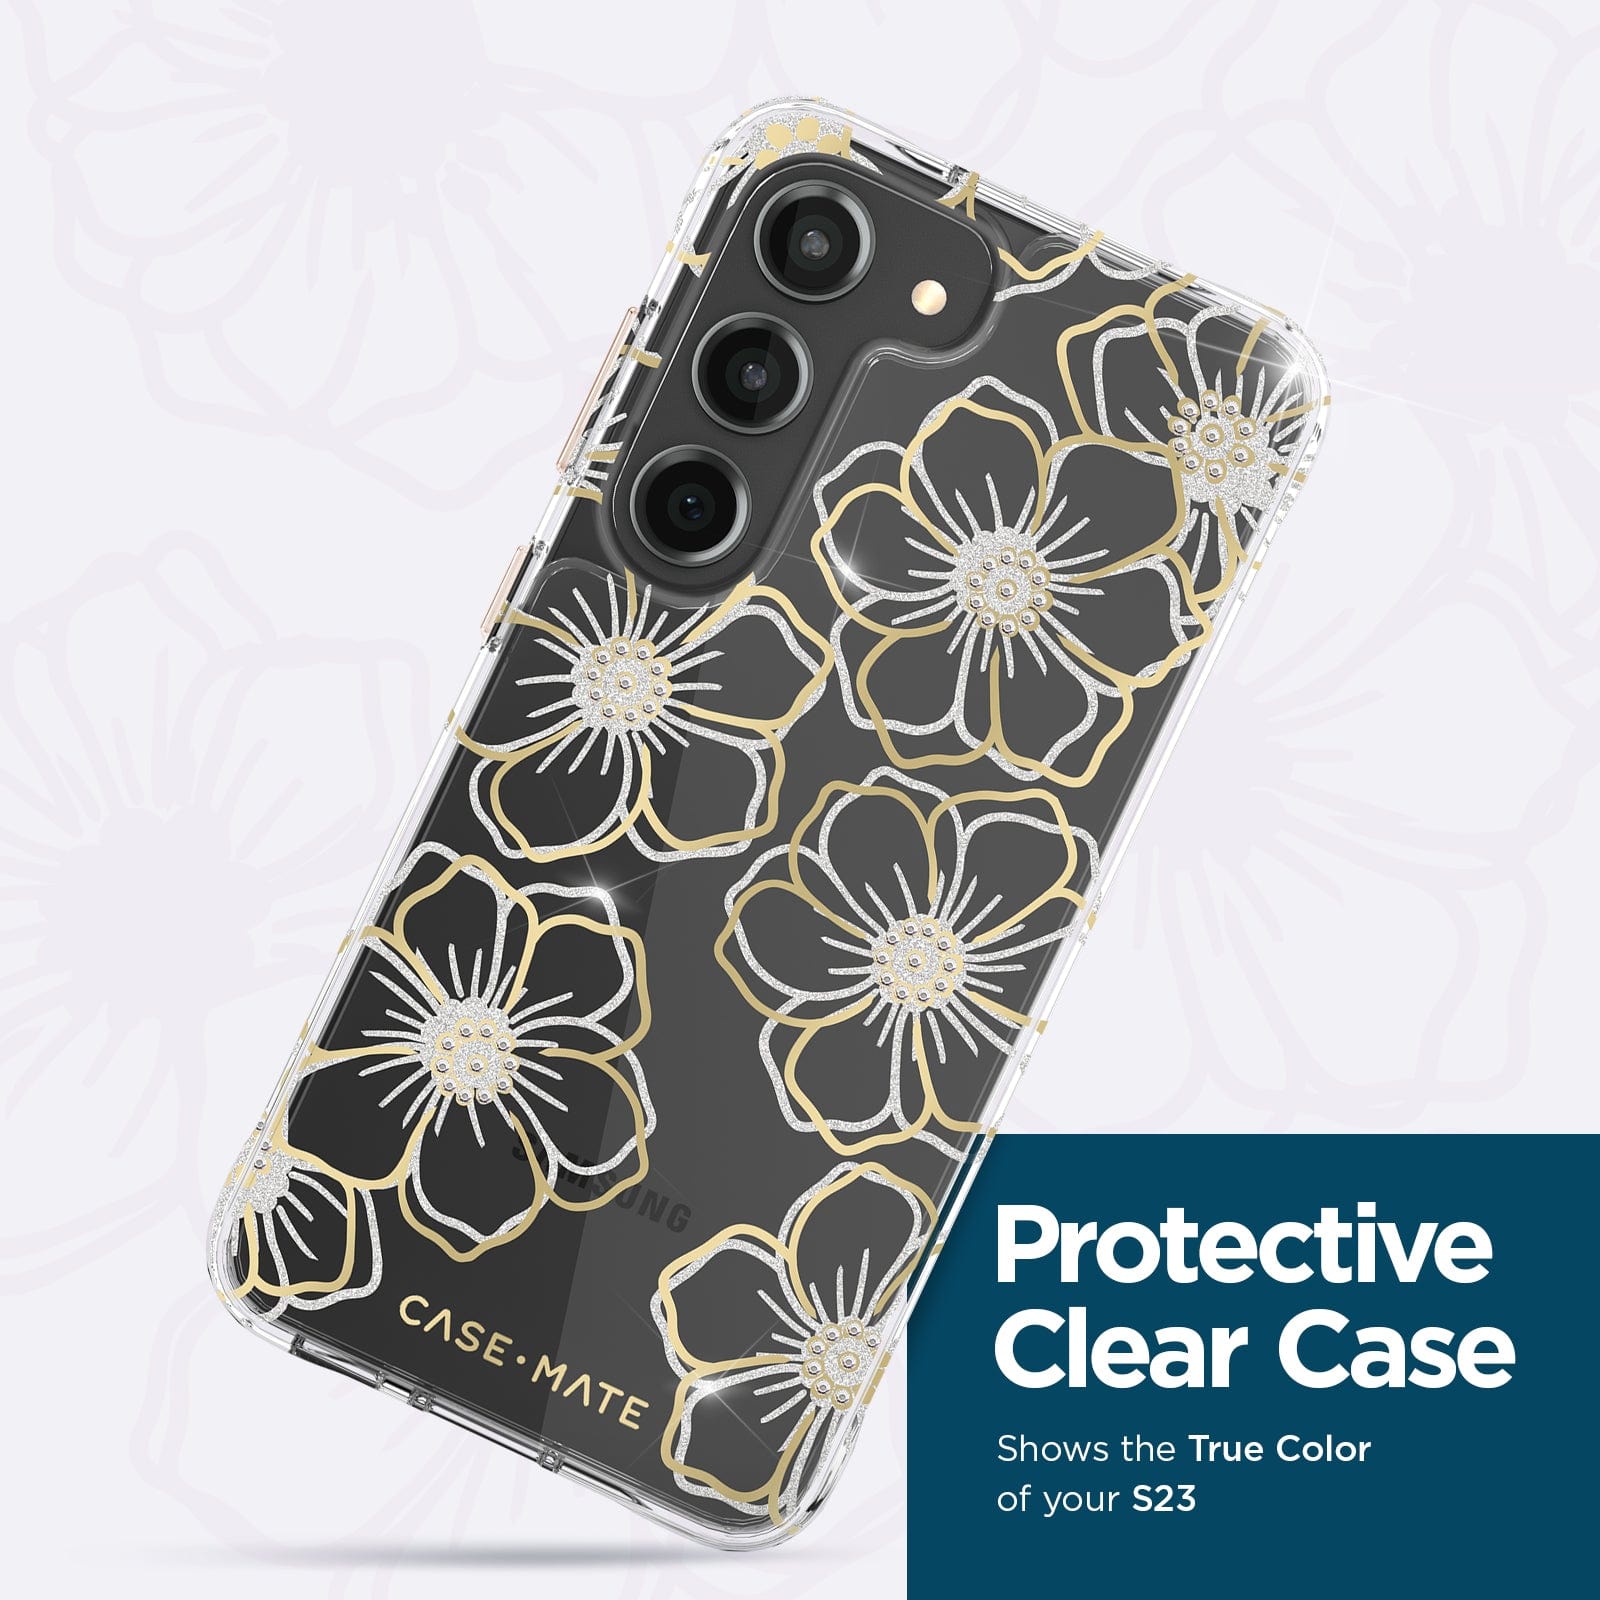 PROTECTIVE CLEAR CASE. SHOWS THE TRUE COLOR OF YOUR S23